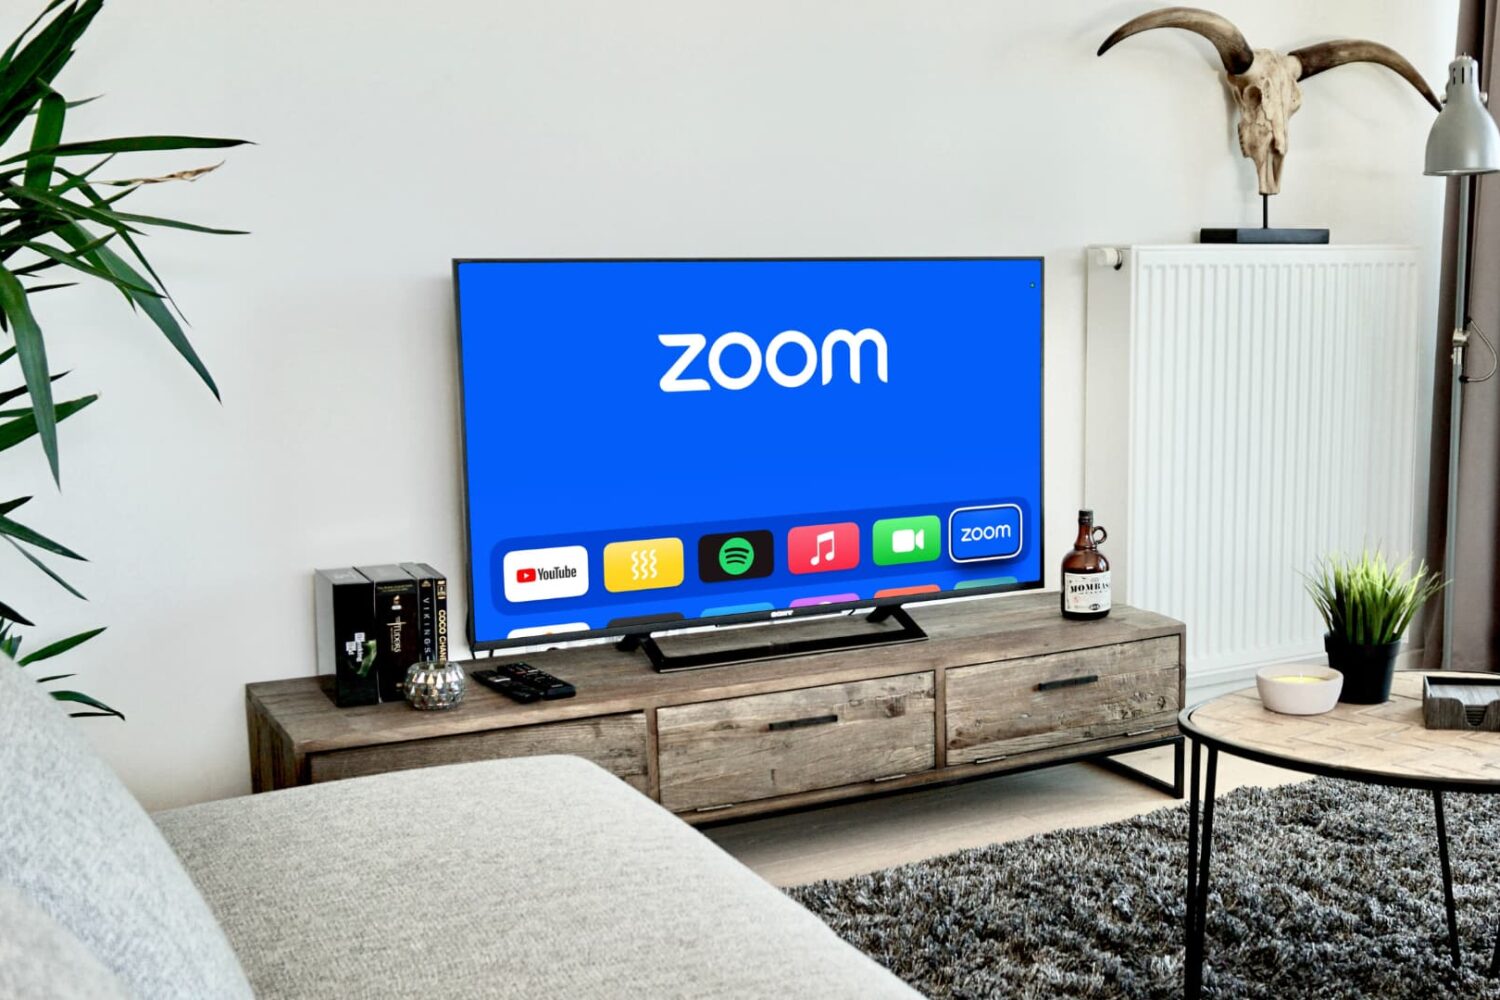 Using Zoom on Apple TV to video call